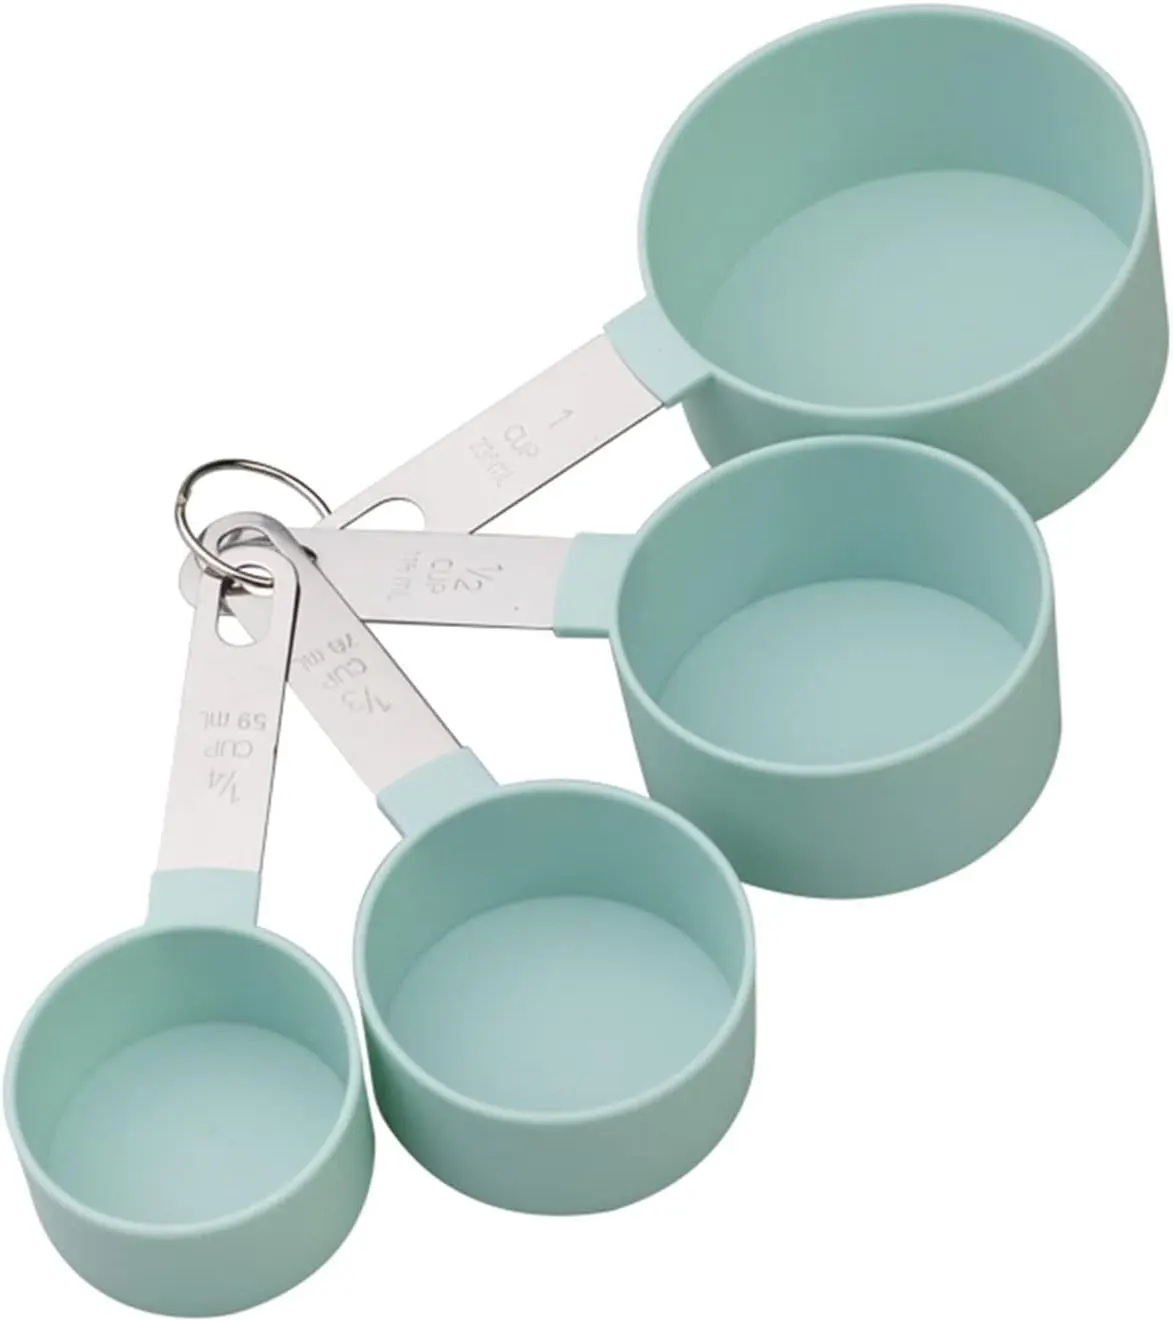 Standard cup set with stainless handles, 4 pieces, multiple colors